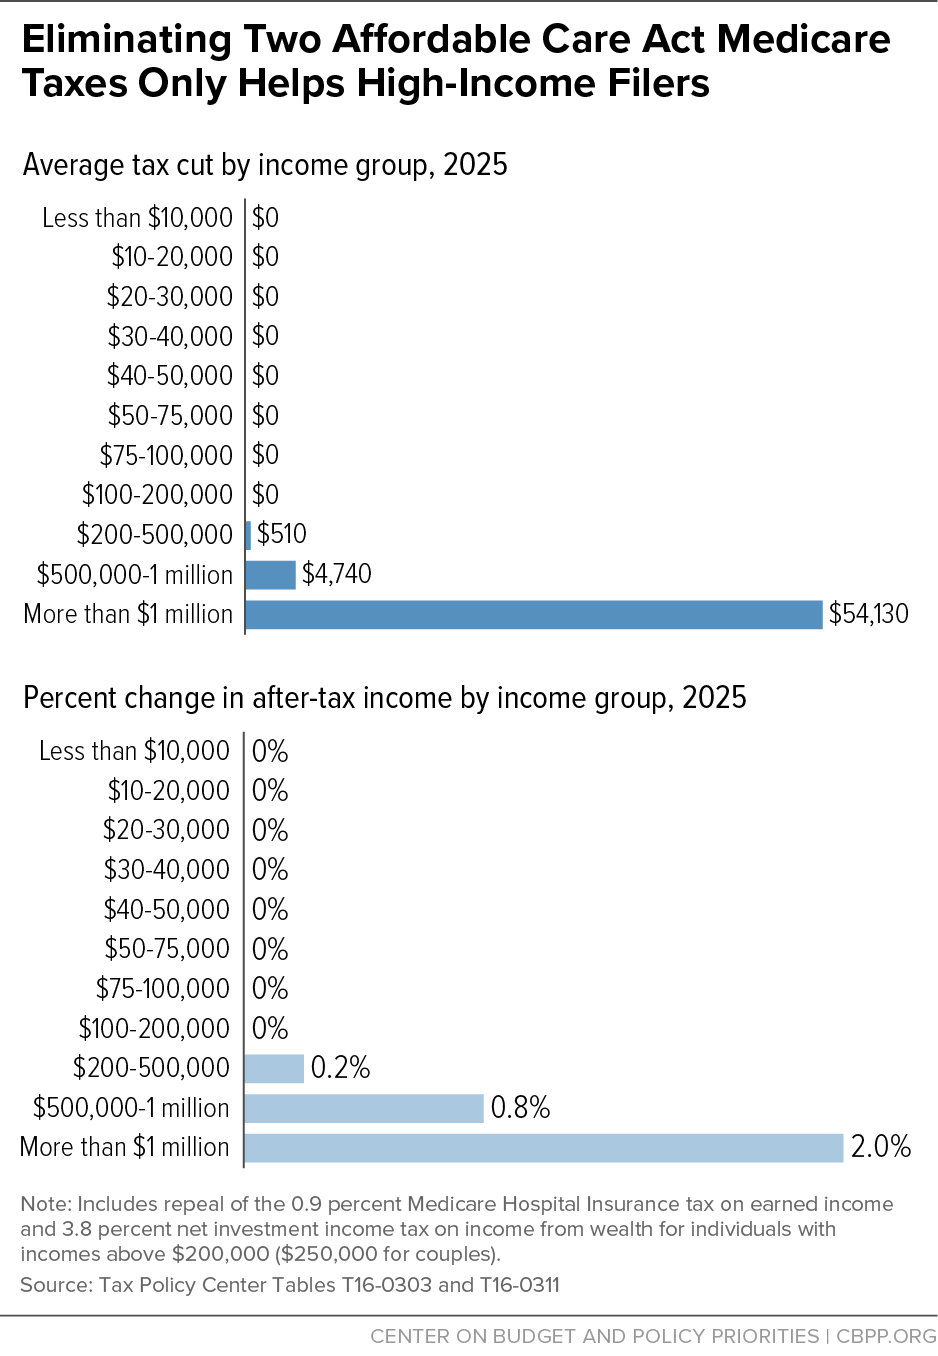 What was the 2014 surtax amount for Medicare?